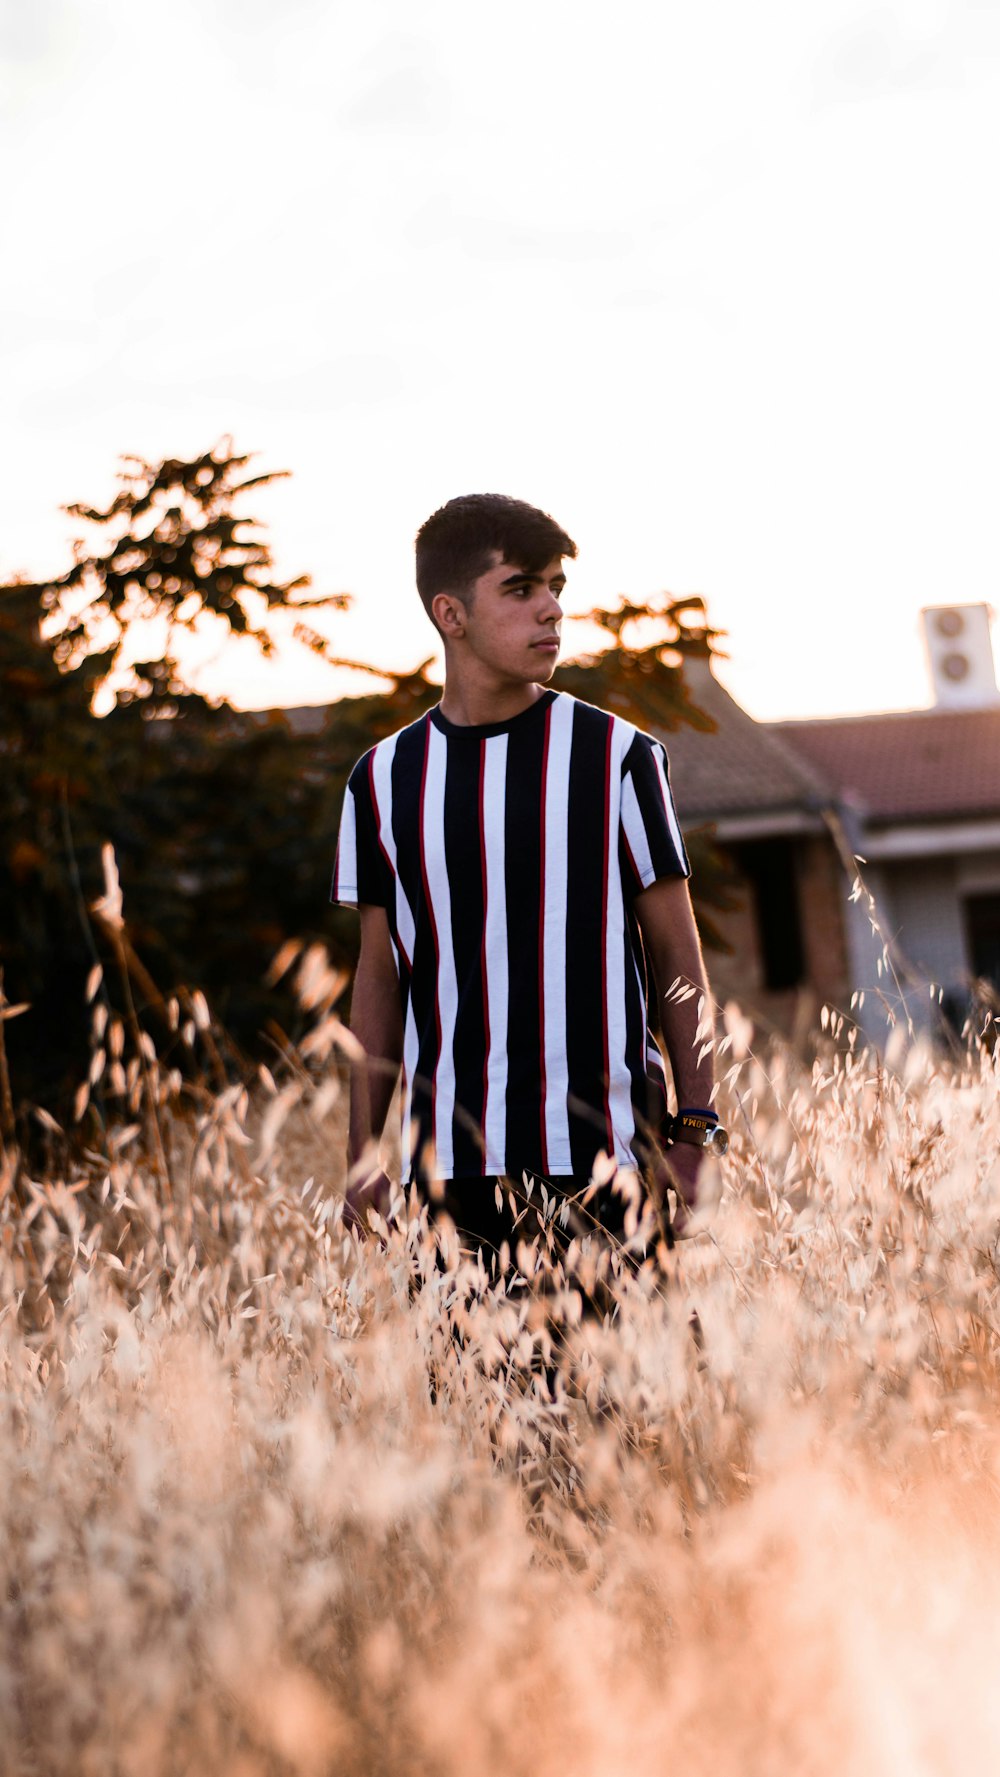 man in black and white striped shirt standing on brown grass field during daytime